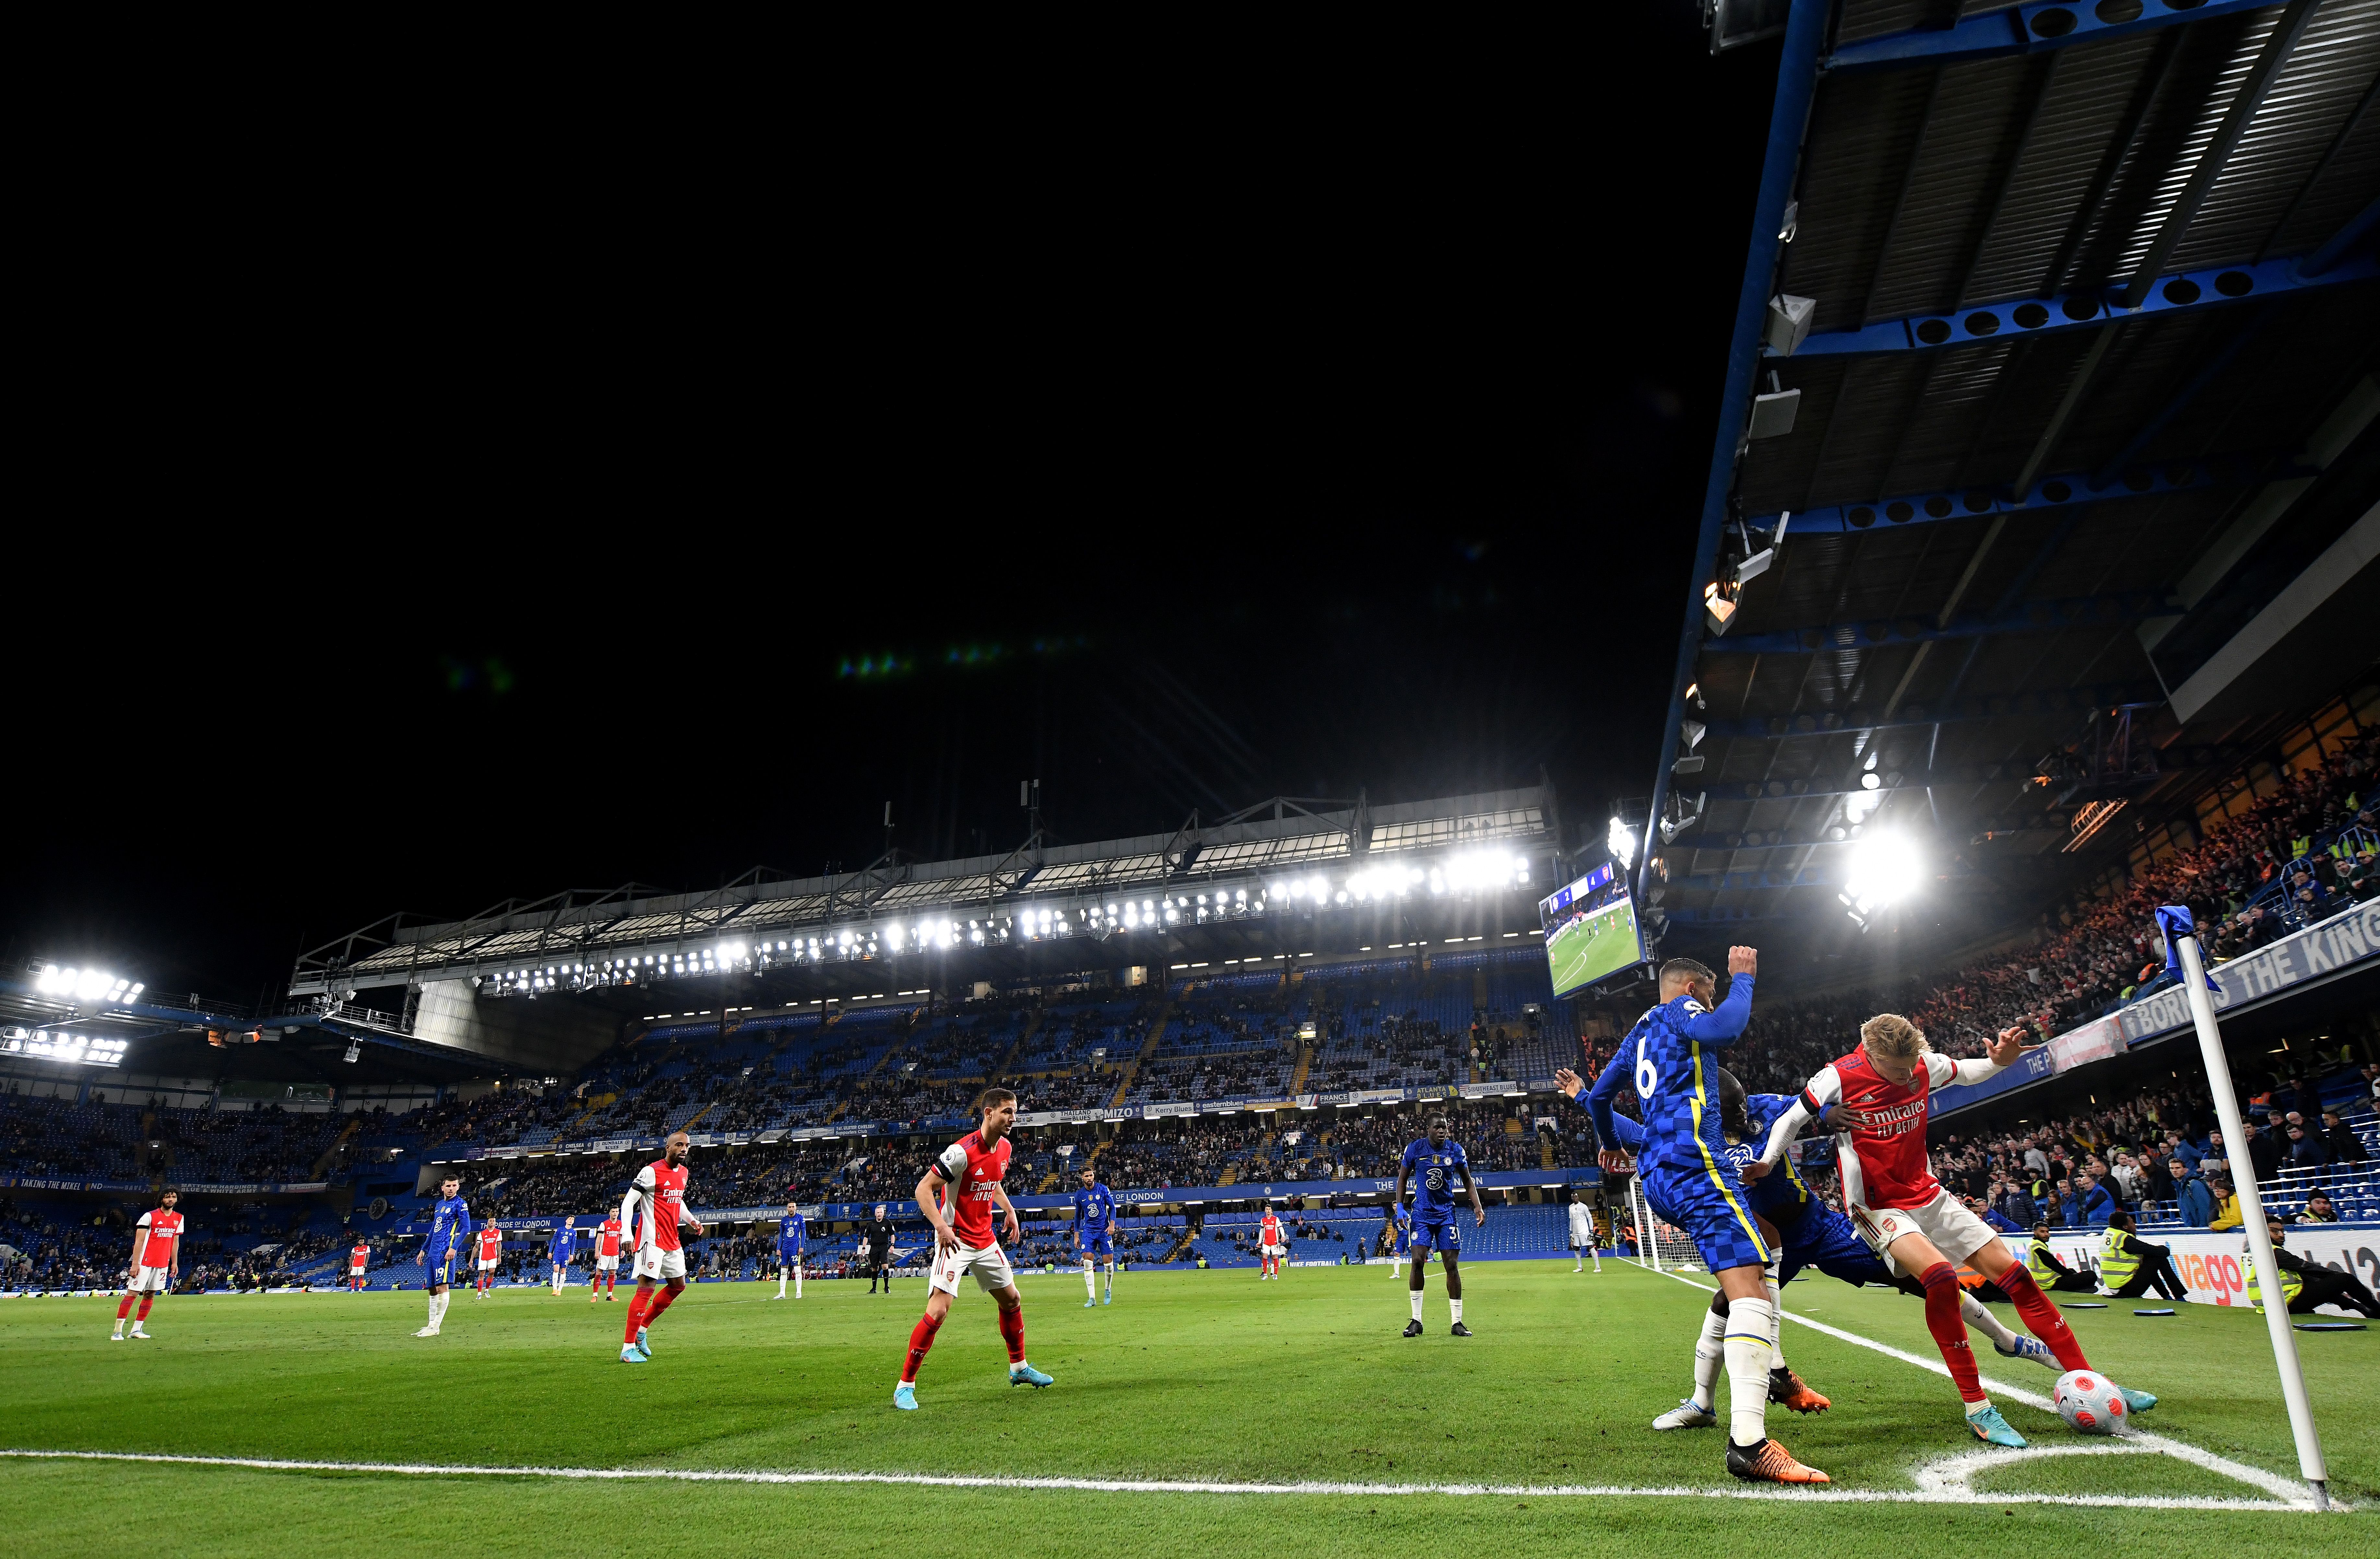 Martin Odegaard of Arsenal holds the ball in the corner under pressure from Thiago Silva of Chelsea 